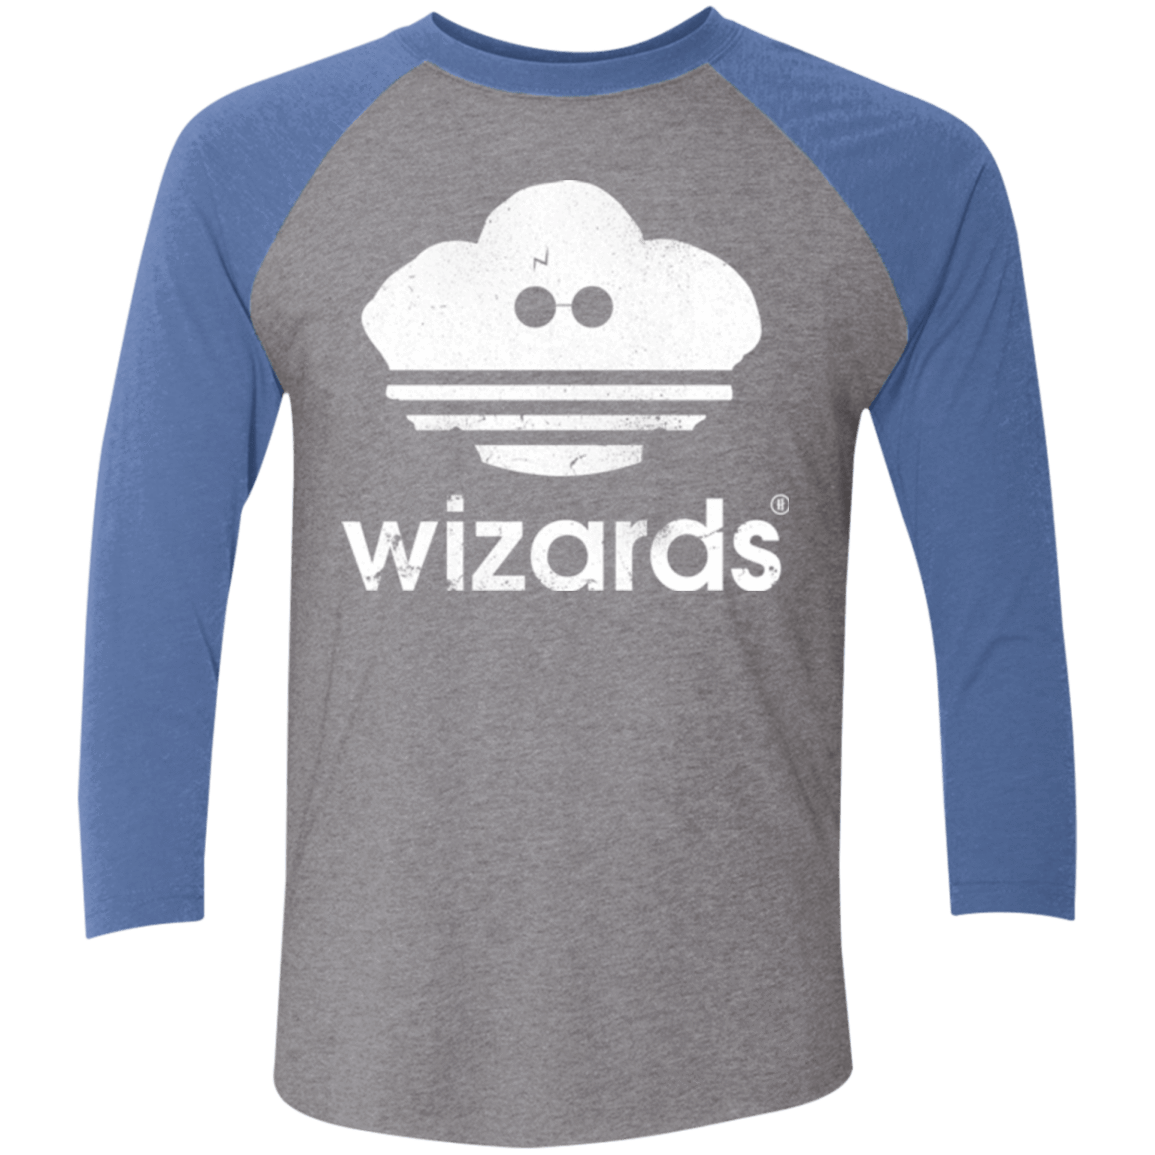 T-Shirts Premium Heather/ Vintage Royal / X-Small Wizards Men's Triblend 3/4 Sleeve